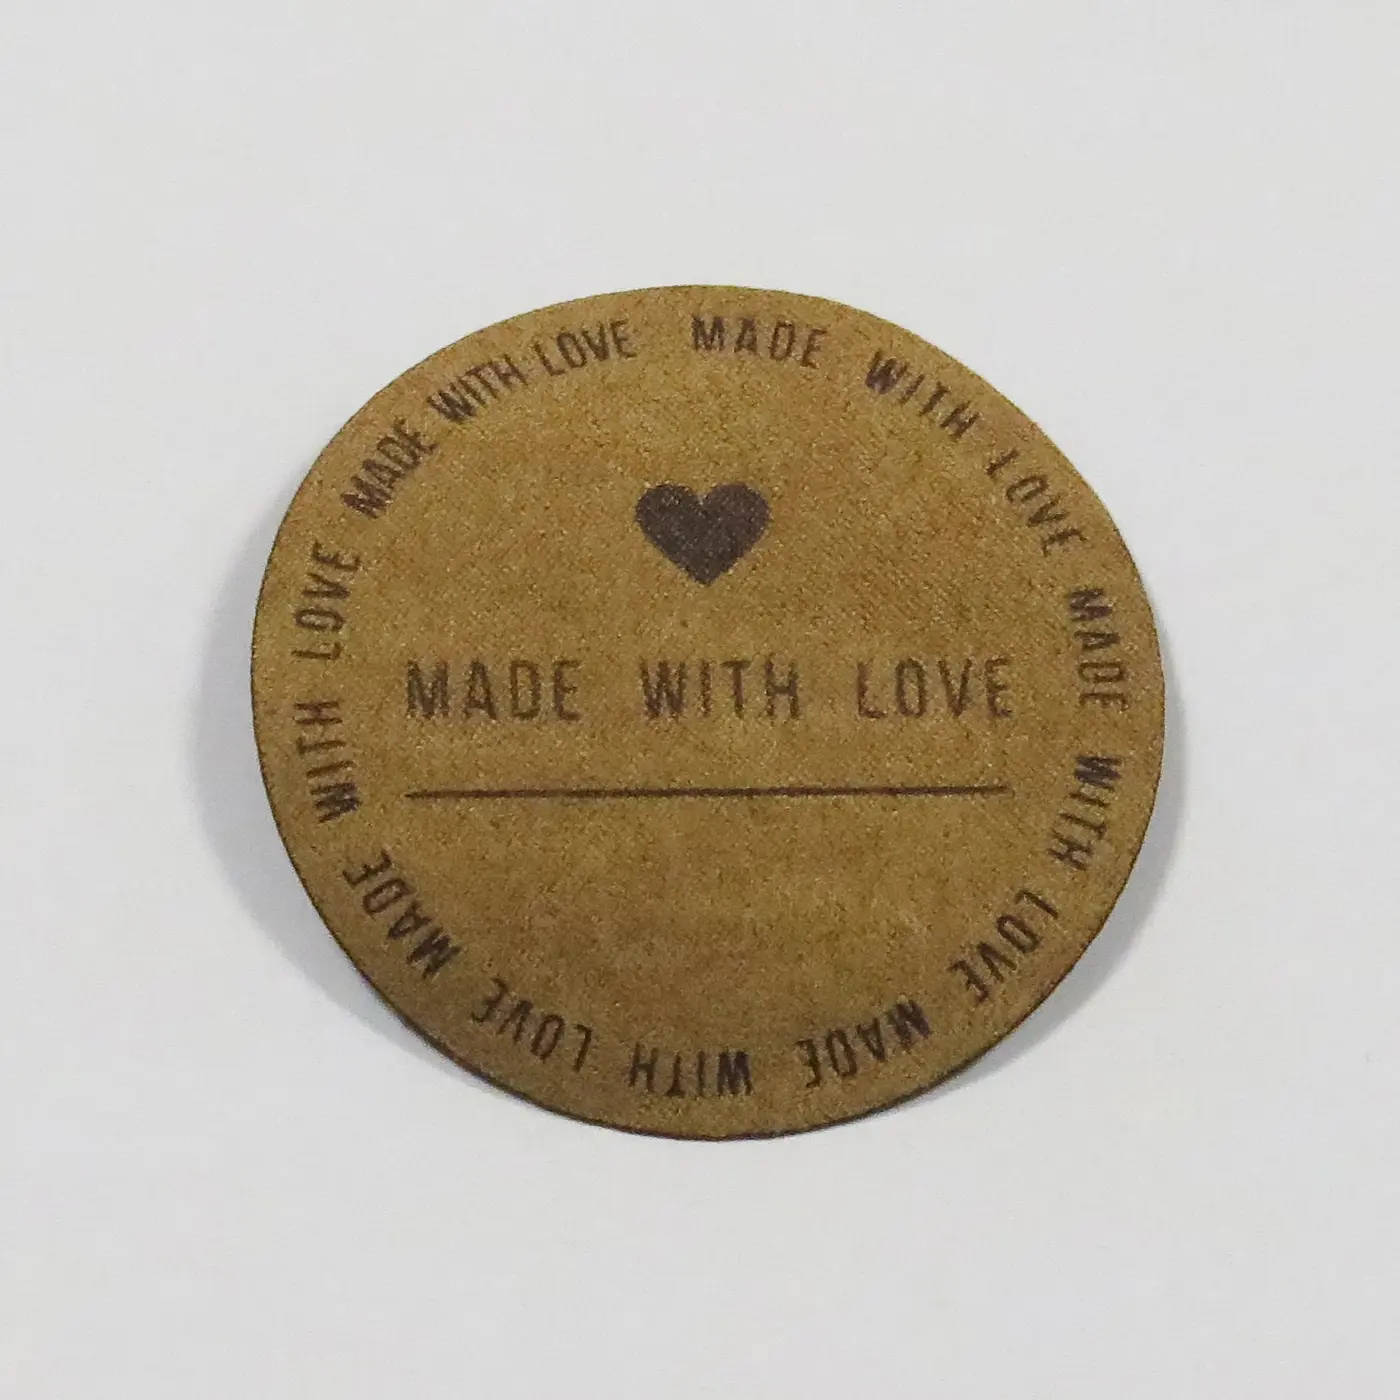 "Made with love"